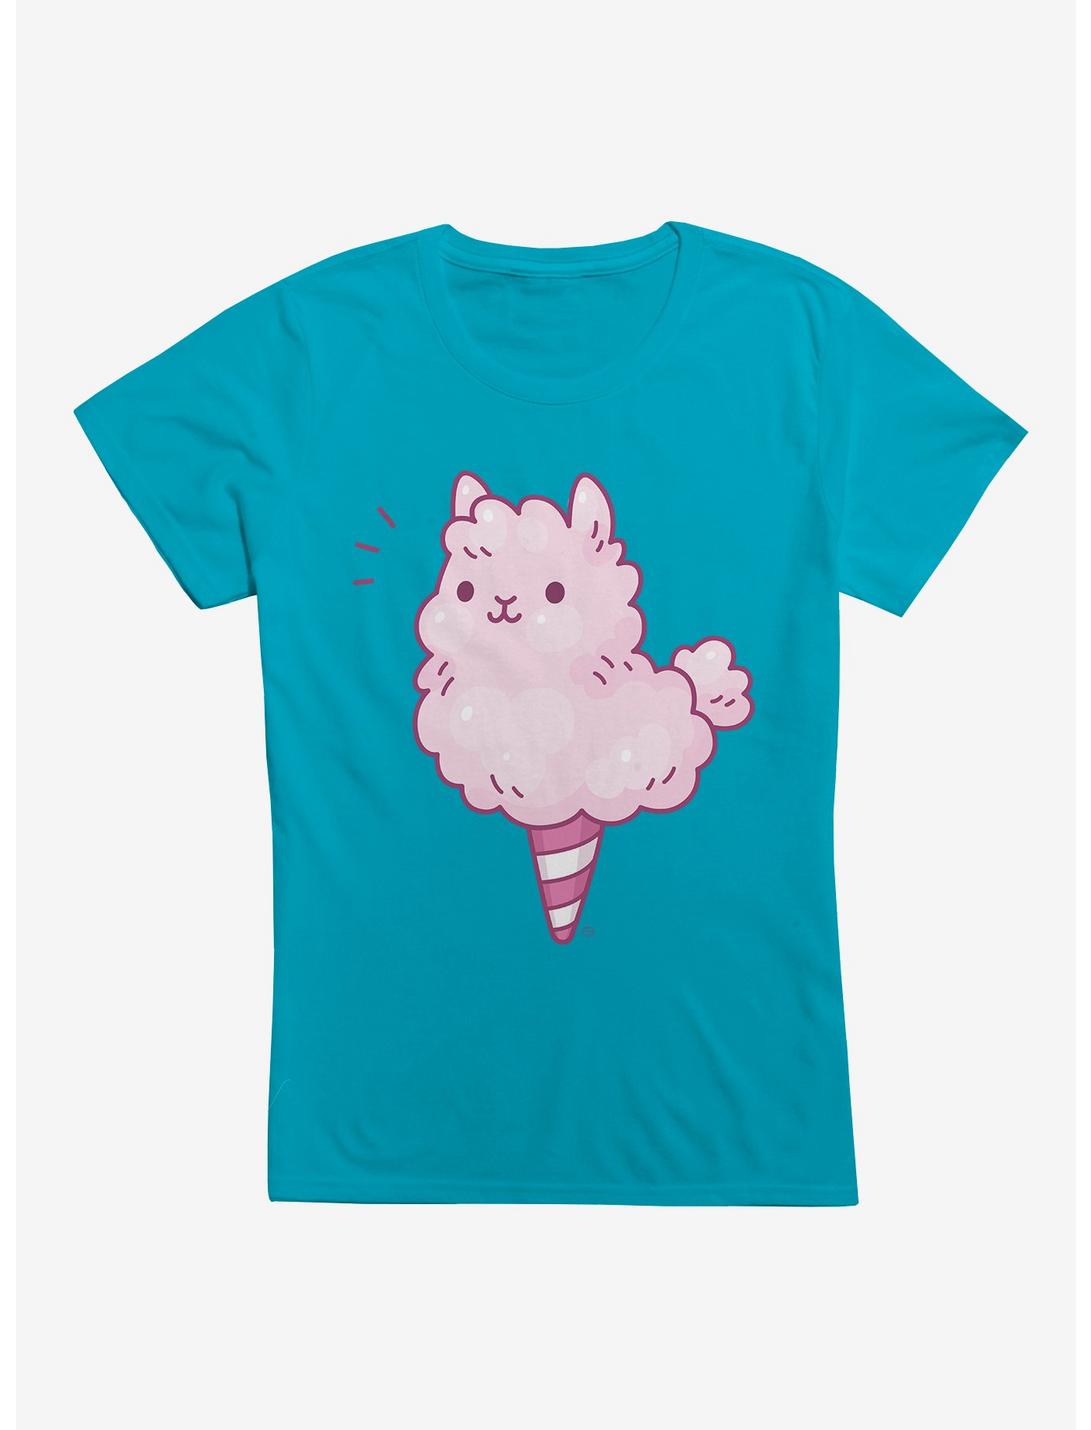 Cotton Candy Alpaca Womens T-Shirt, TURQUOISE, hi-res